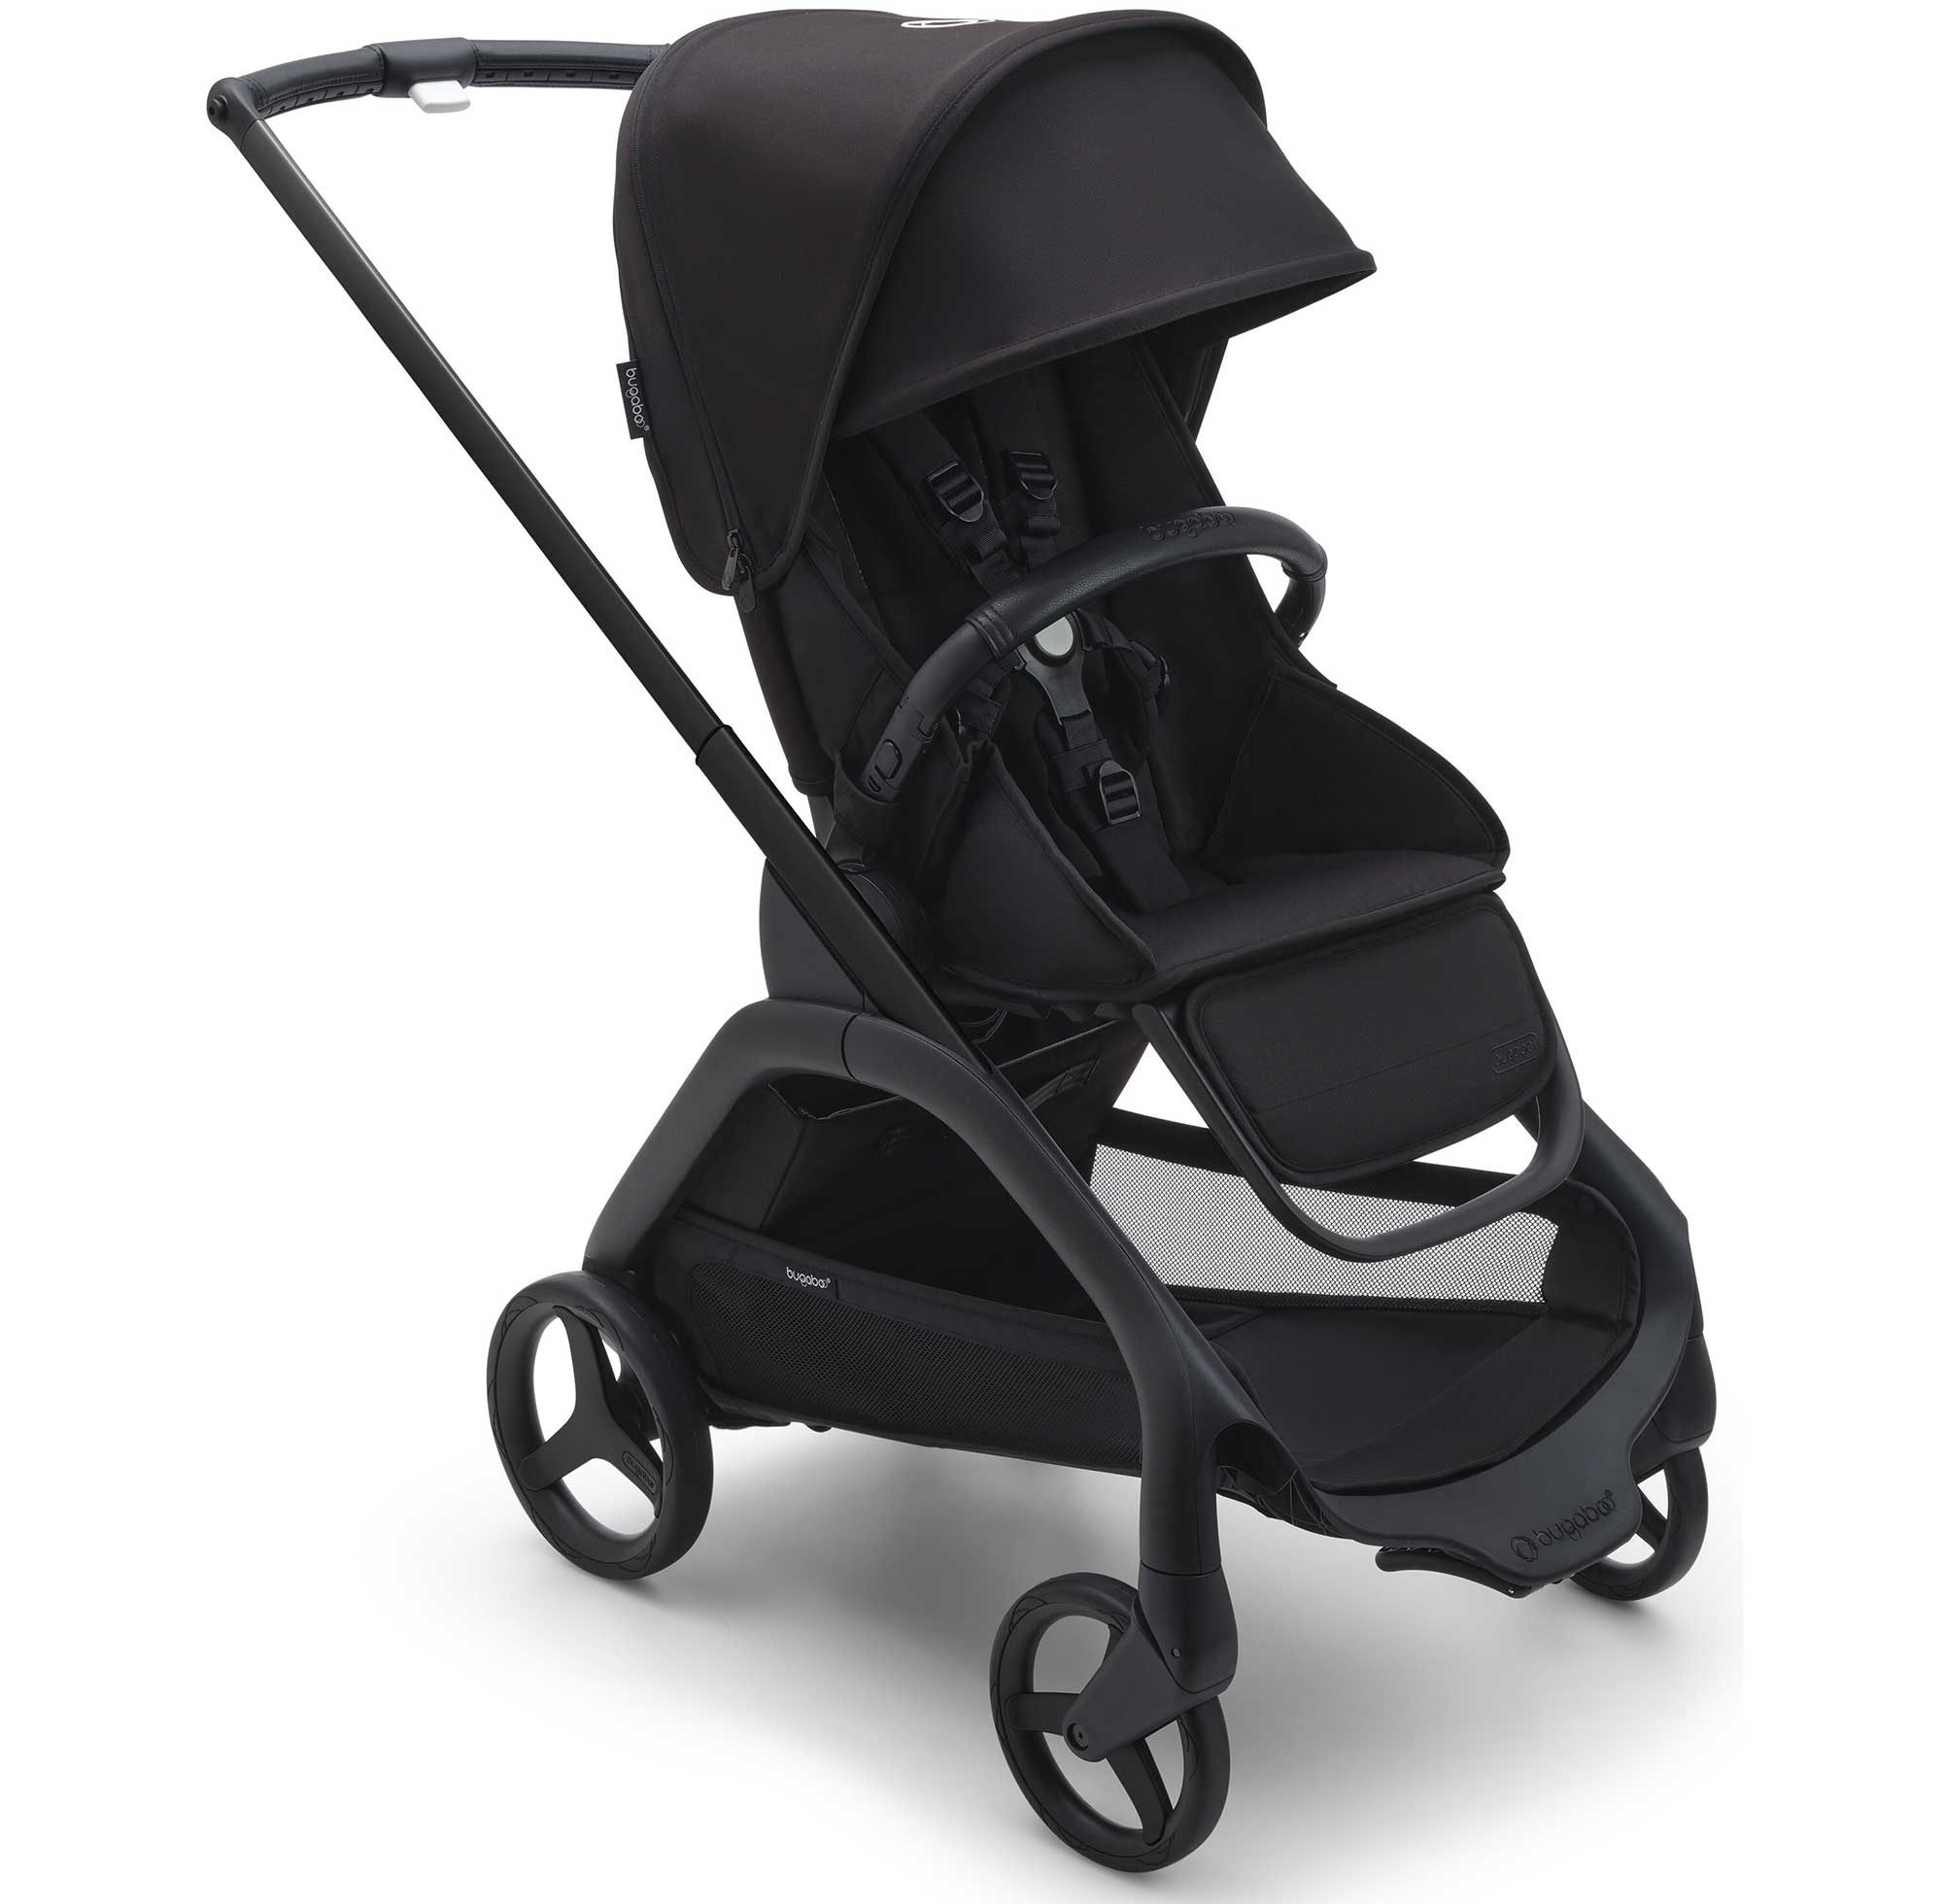 Bugaboo Dragonfly Pebble 360 Pro Travel System - Black/Midnight Black Travel Systems 13817-BLK-MID-BLK 8717447448044